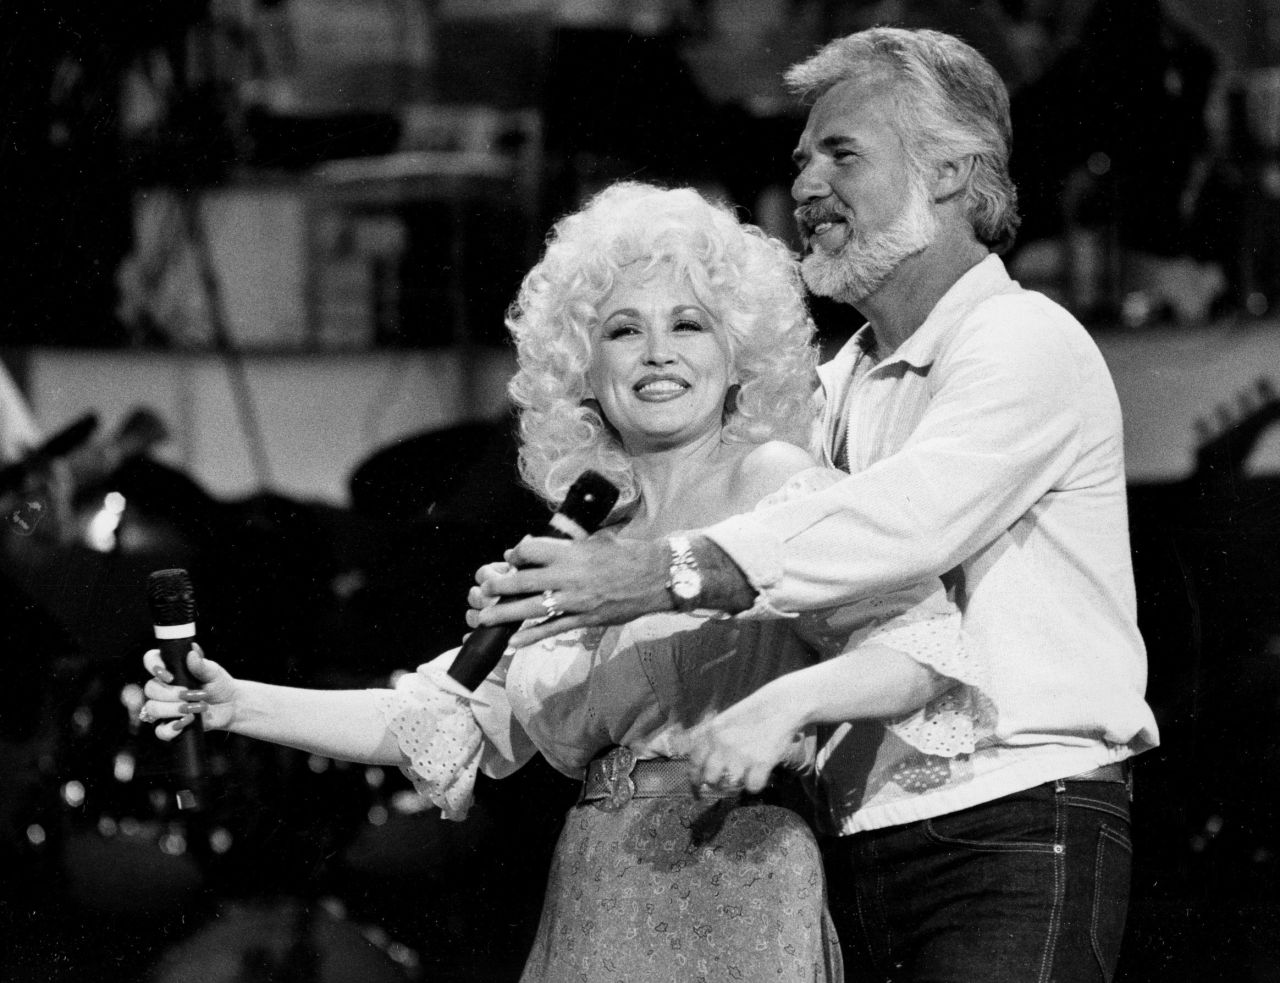 Dolly Parton and Rogers rehearse a song for their appearance on the TV show "Live... And in Person" in 1983.